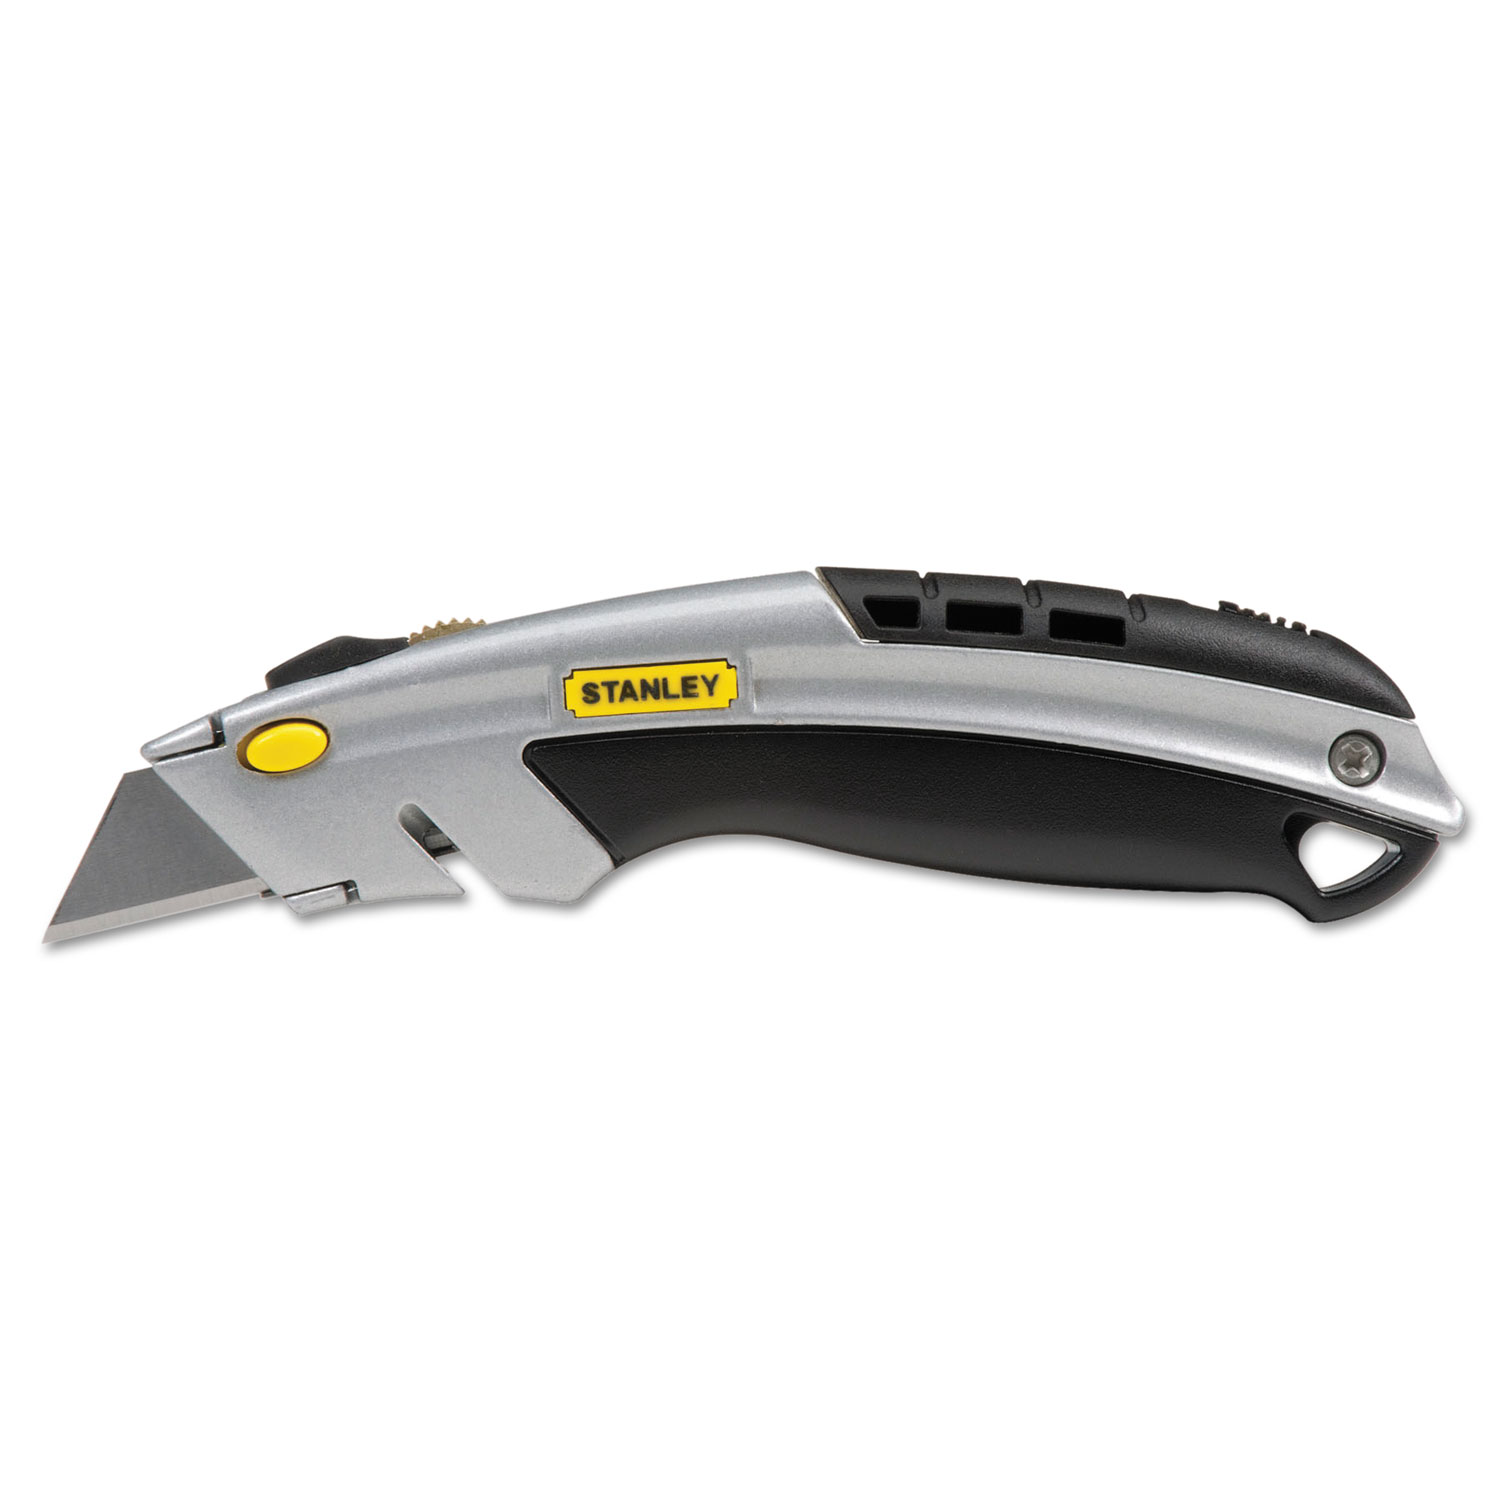 Curved Quick-Change Utility Knife, Stainless Steel Retractable Blade, 3 Blades